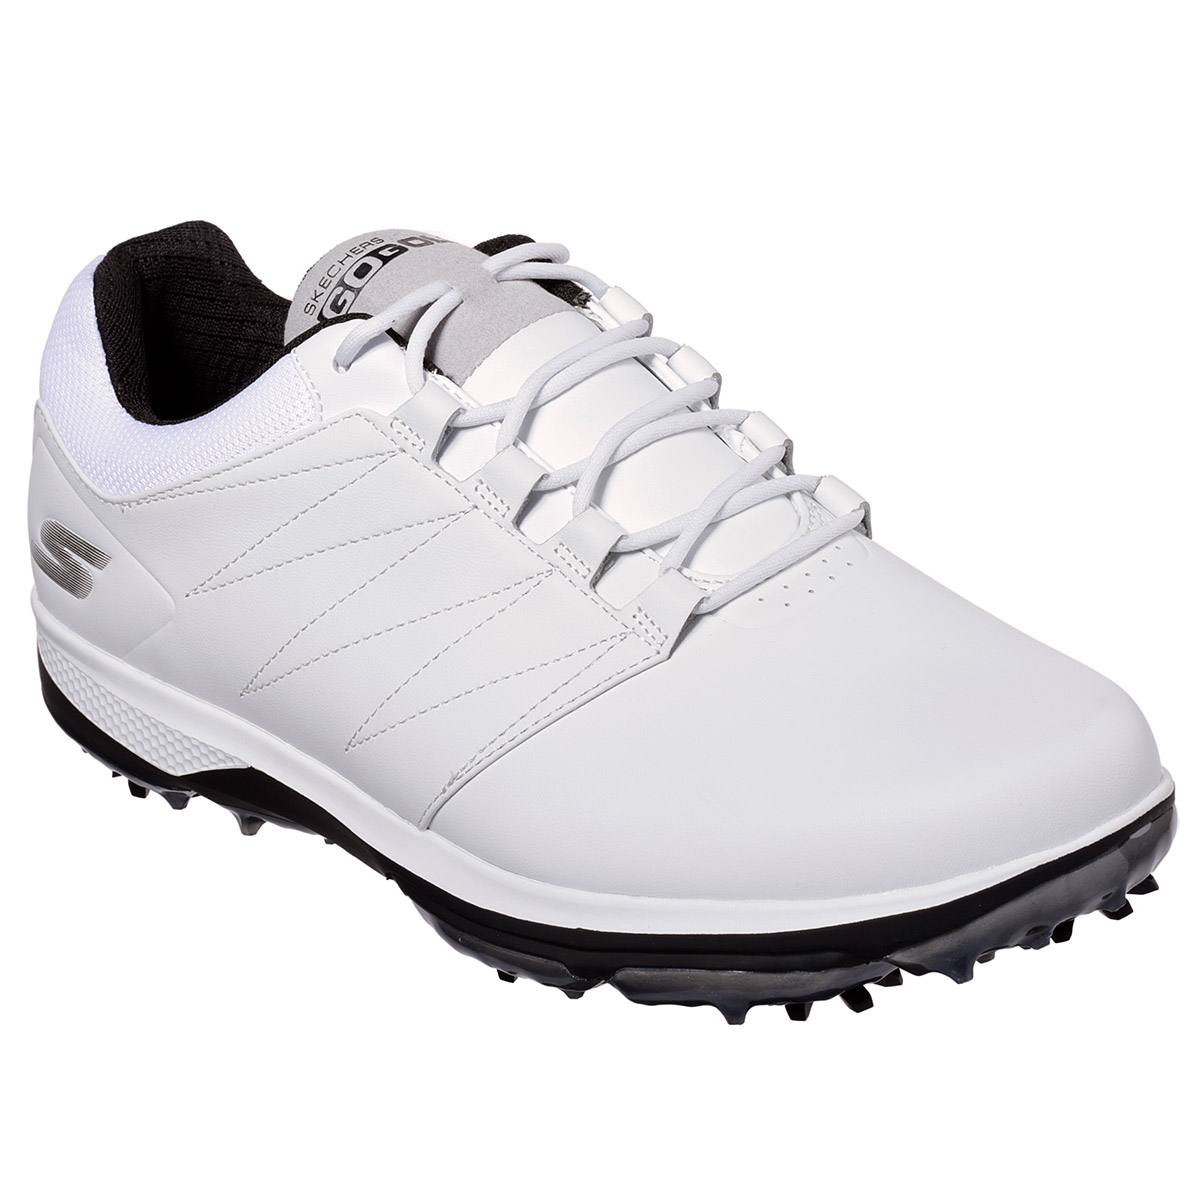 Skechers Go Golf Pro 4 Shoes from 